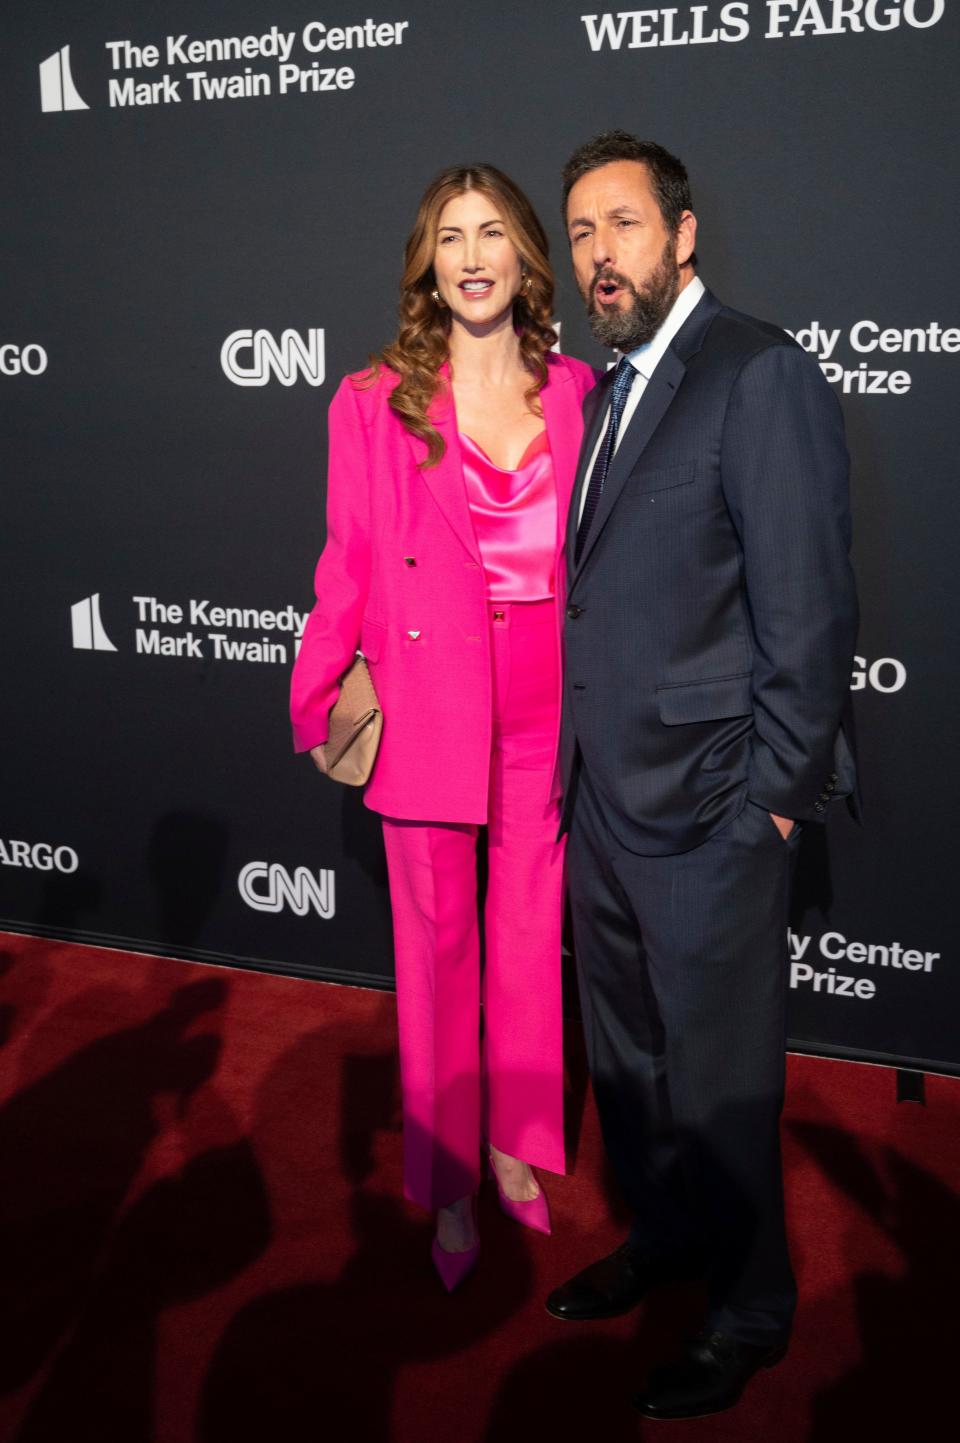 Mark Twain Prize recipient Adam Sandler, right, and his wife, Jackie Sandler, arrive on the red carpet at the start of the 24th Annual Mark Twain Prize for American Humor at the Kennedy Center for the Performing Arts on March 19, 2023.